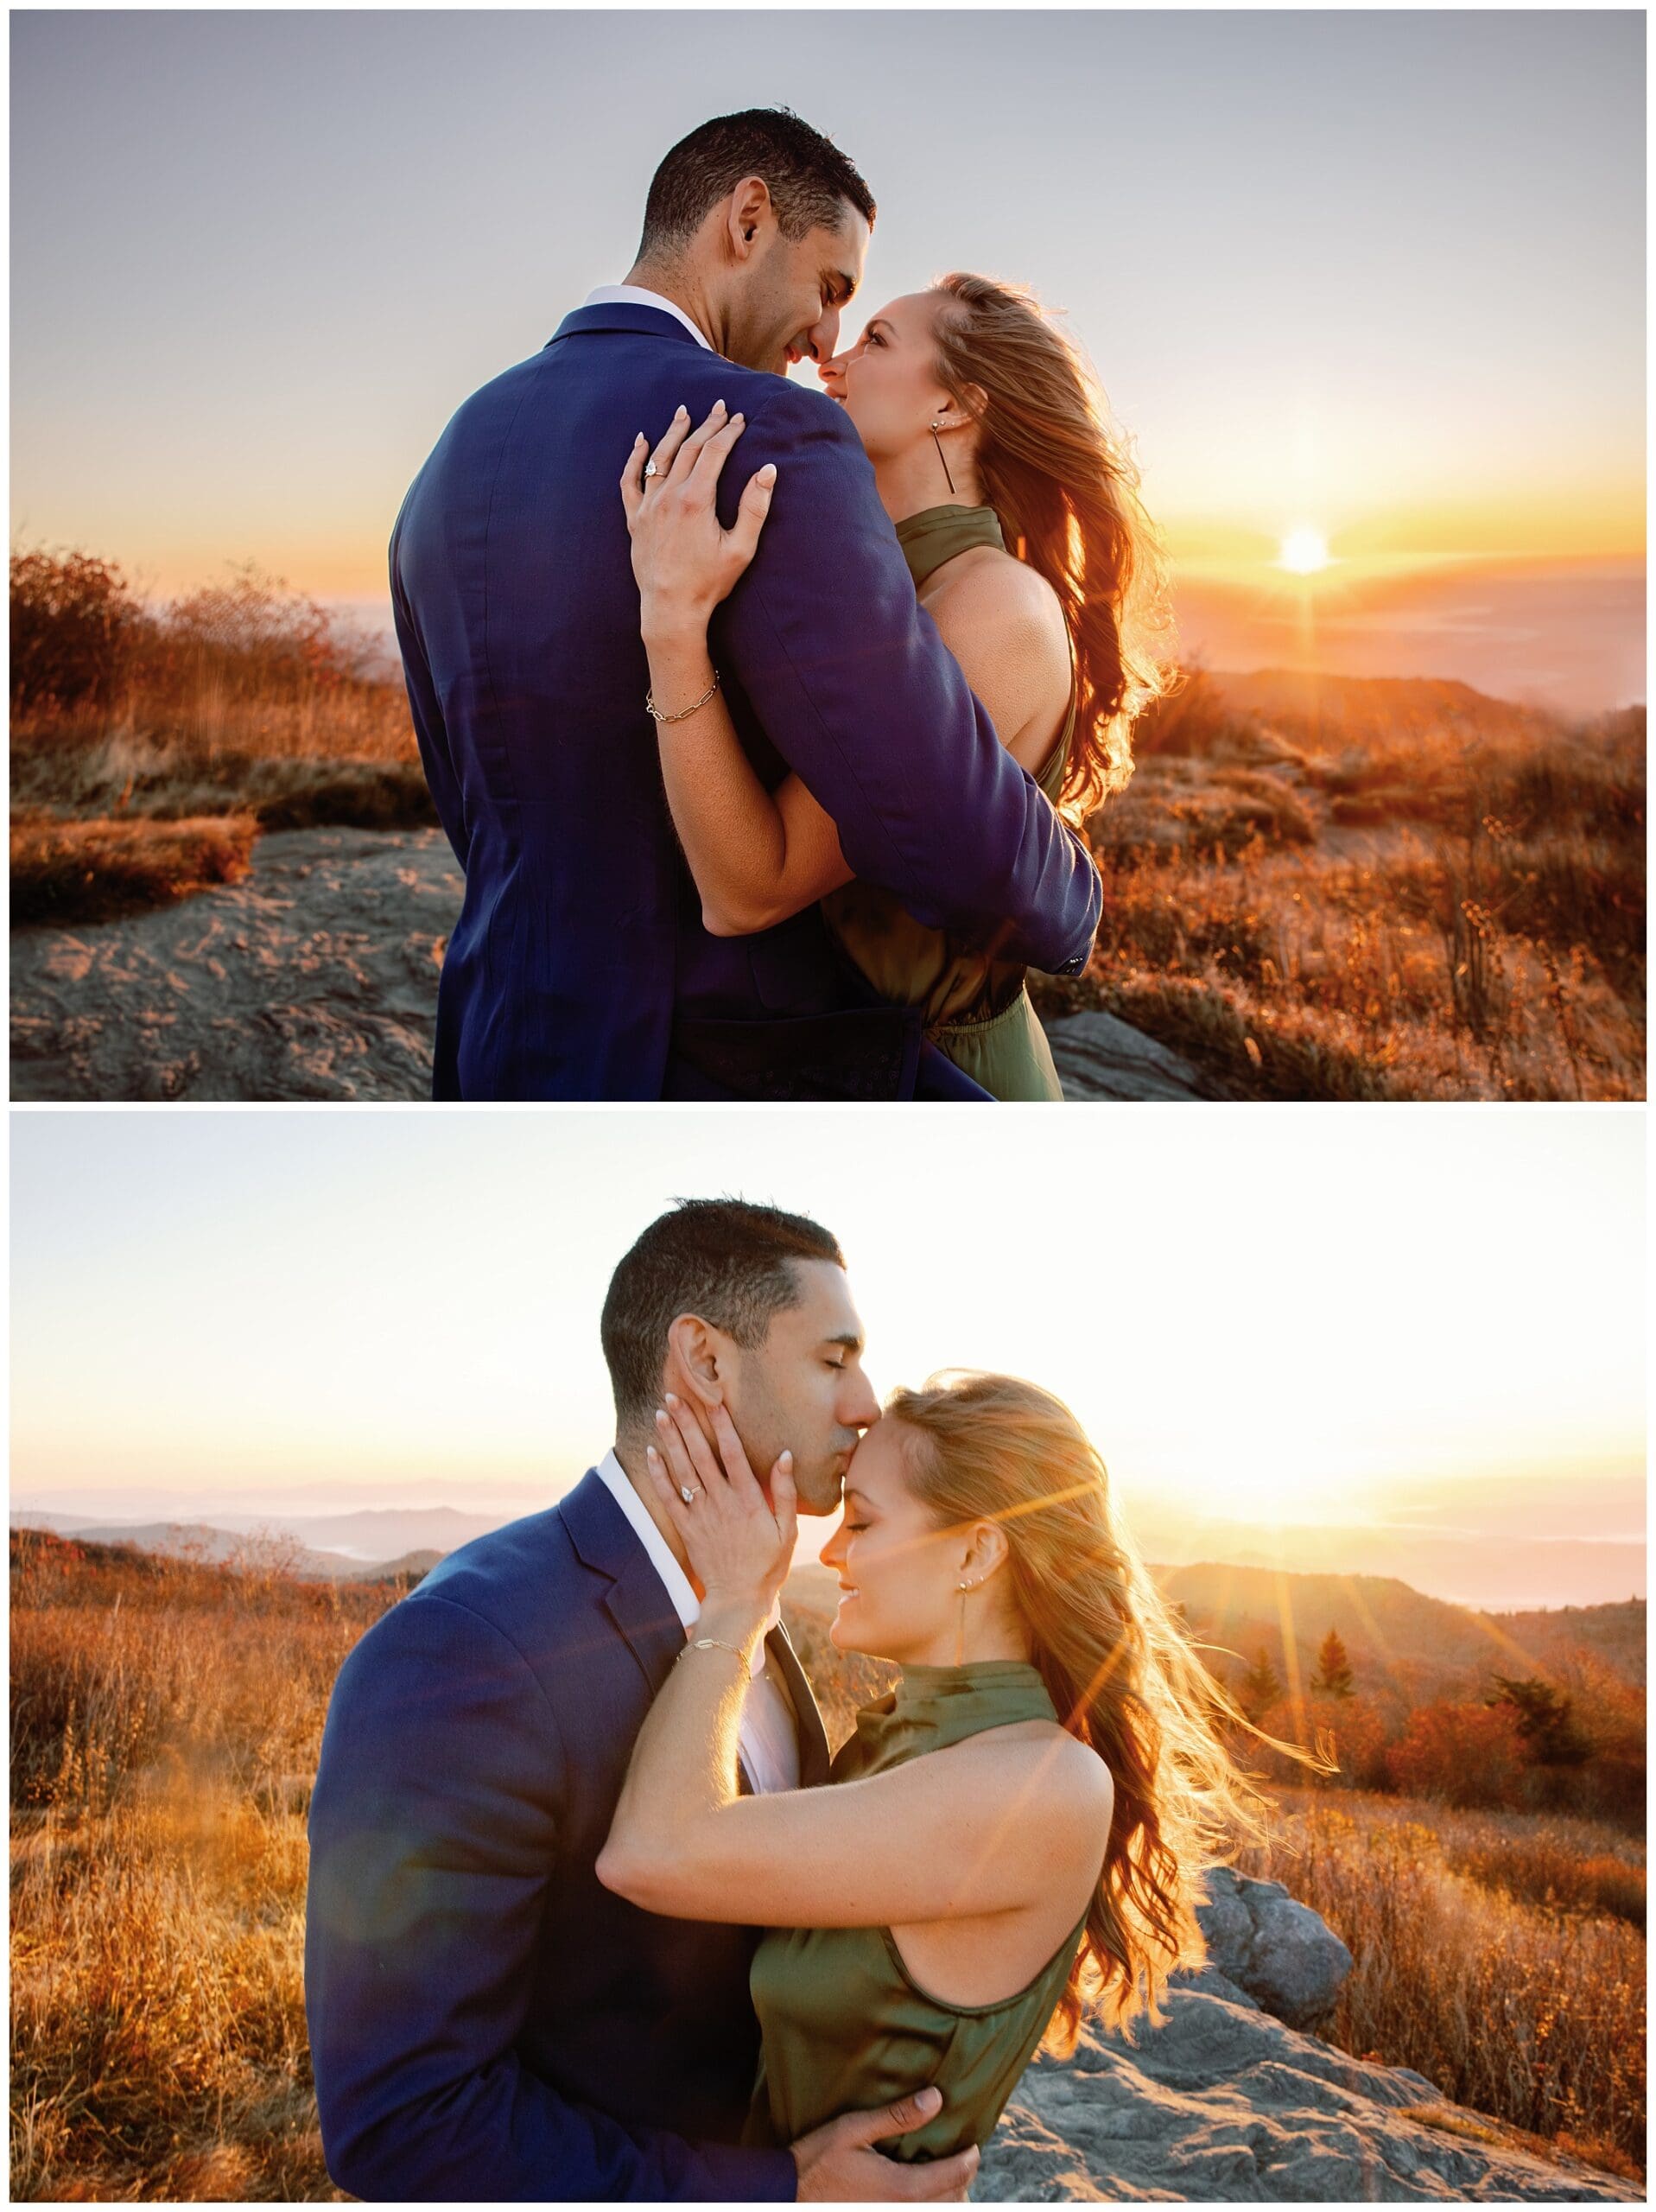 Silhouetted against a spectacular sunset, the couple shares a tender kiss, creating a timeless and romantic moment. The dramatic sky and mountain ridge in the background add a sense of grandeur to their love story. Asheville Sunrise Engagement Session 